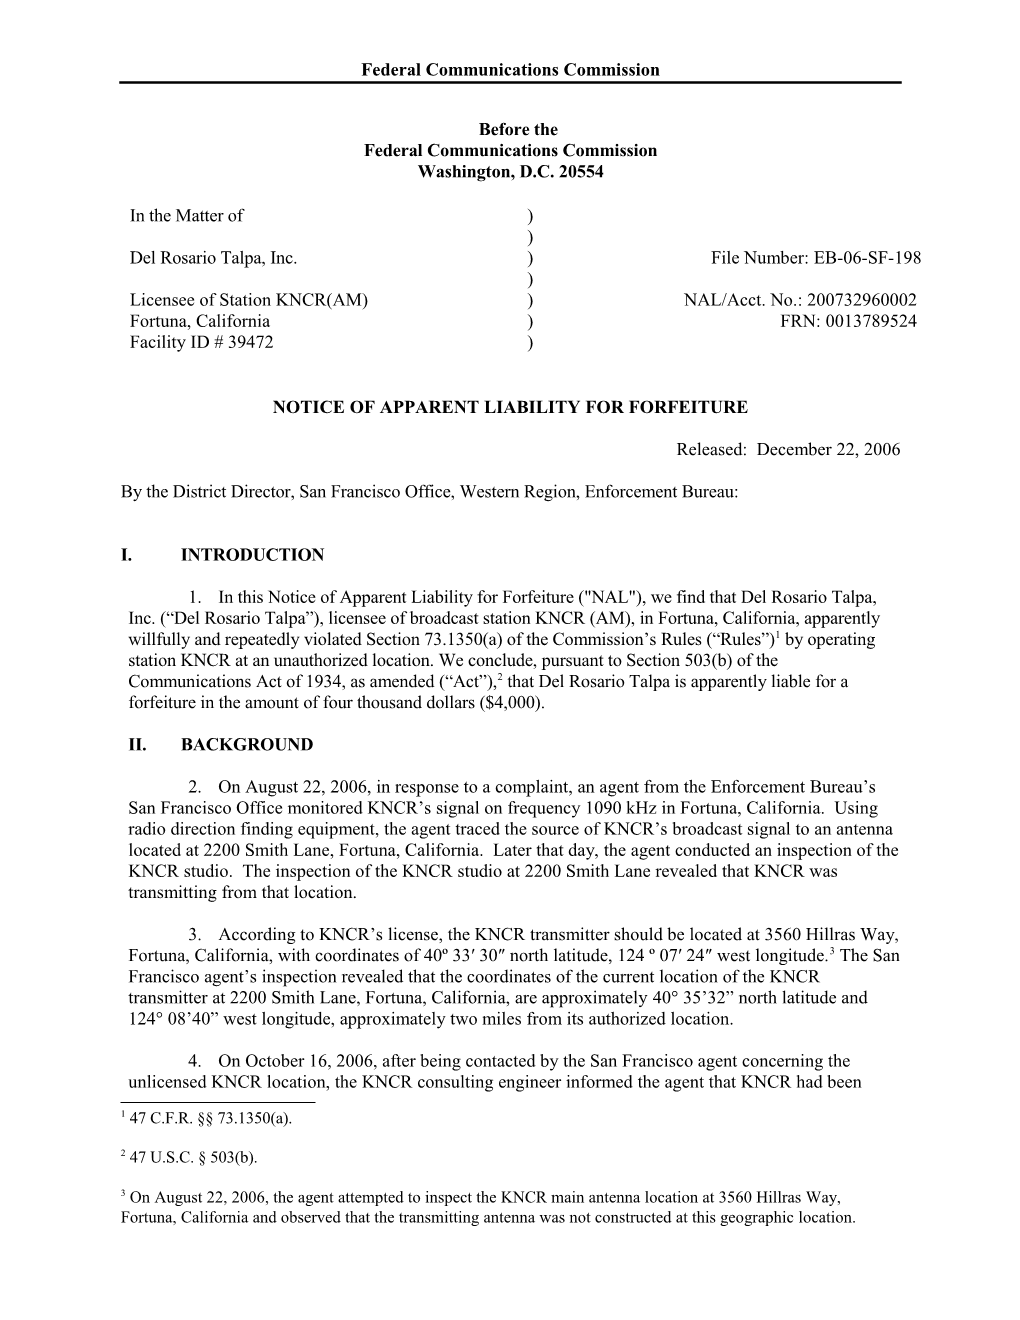 Notice of Apparent Liability for Forfeiture s16